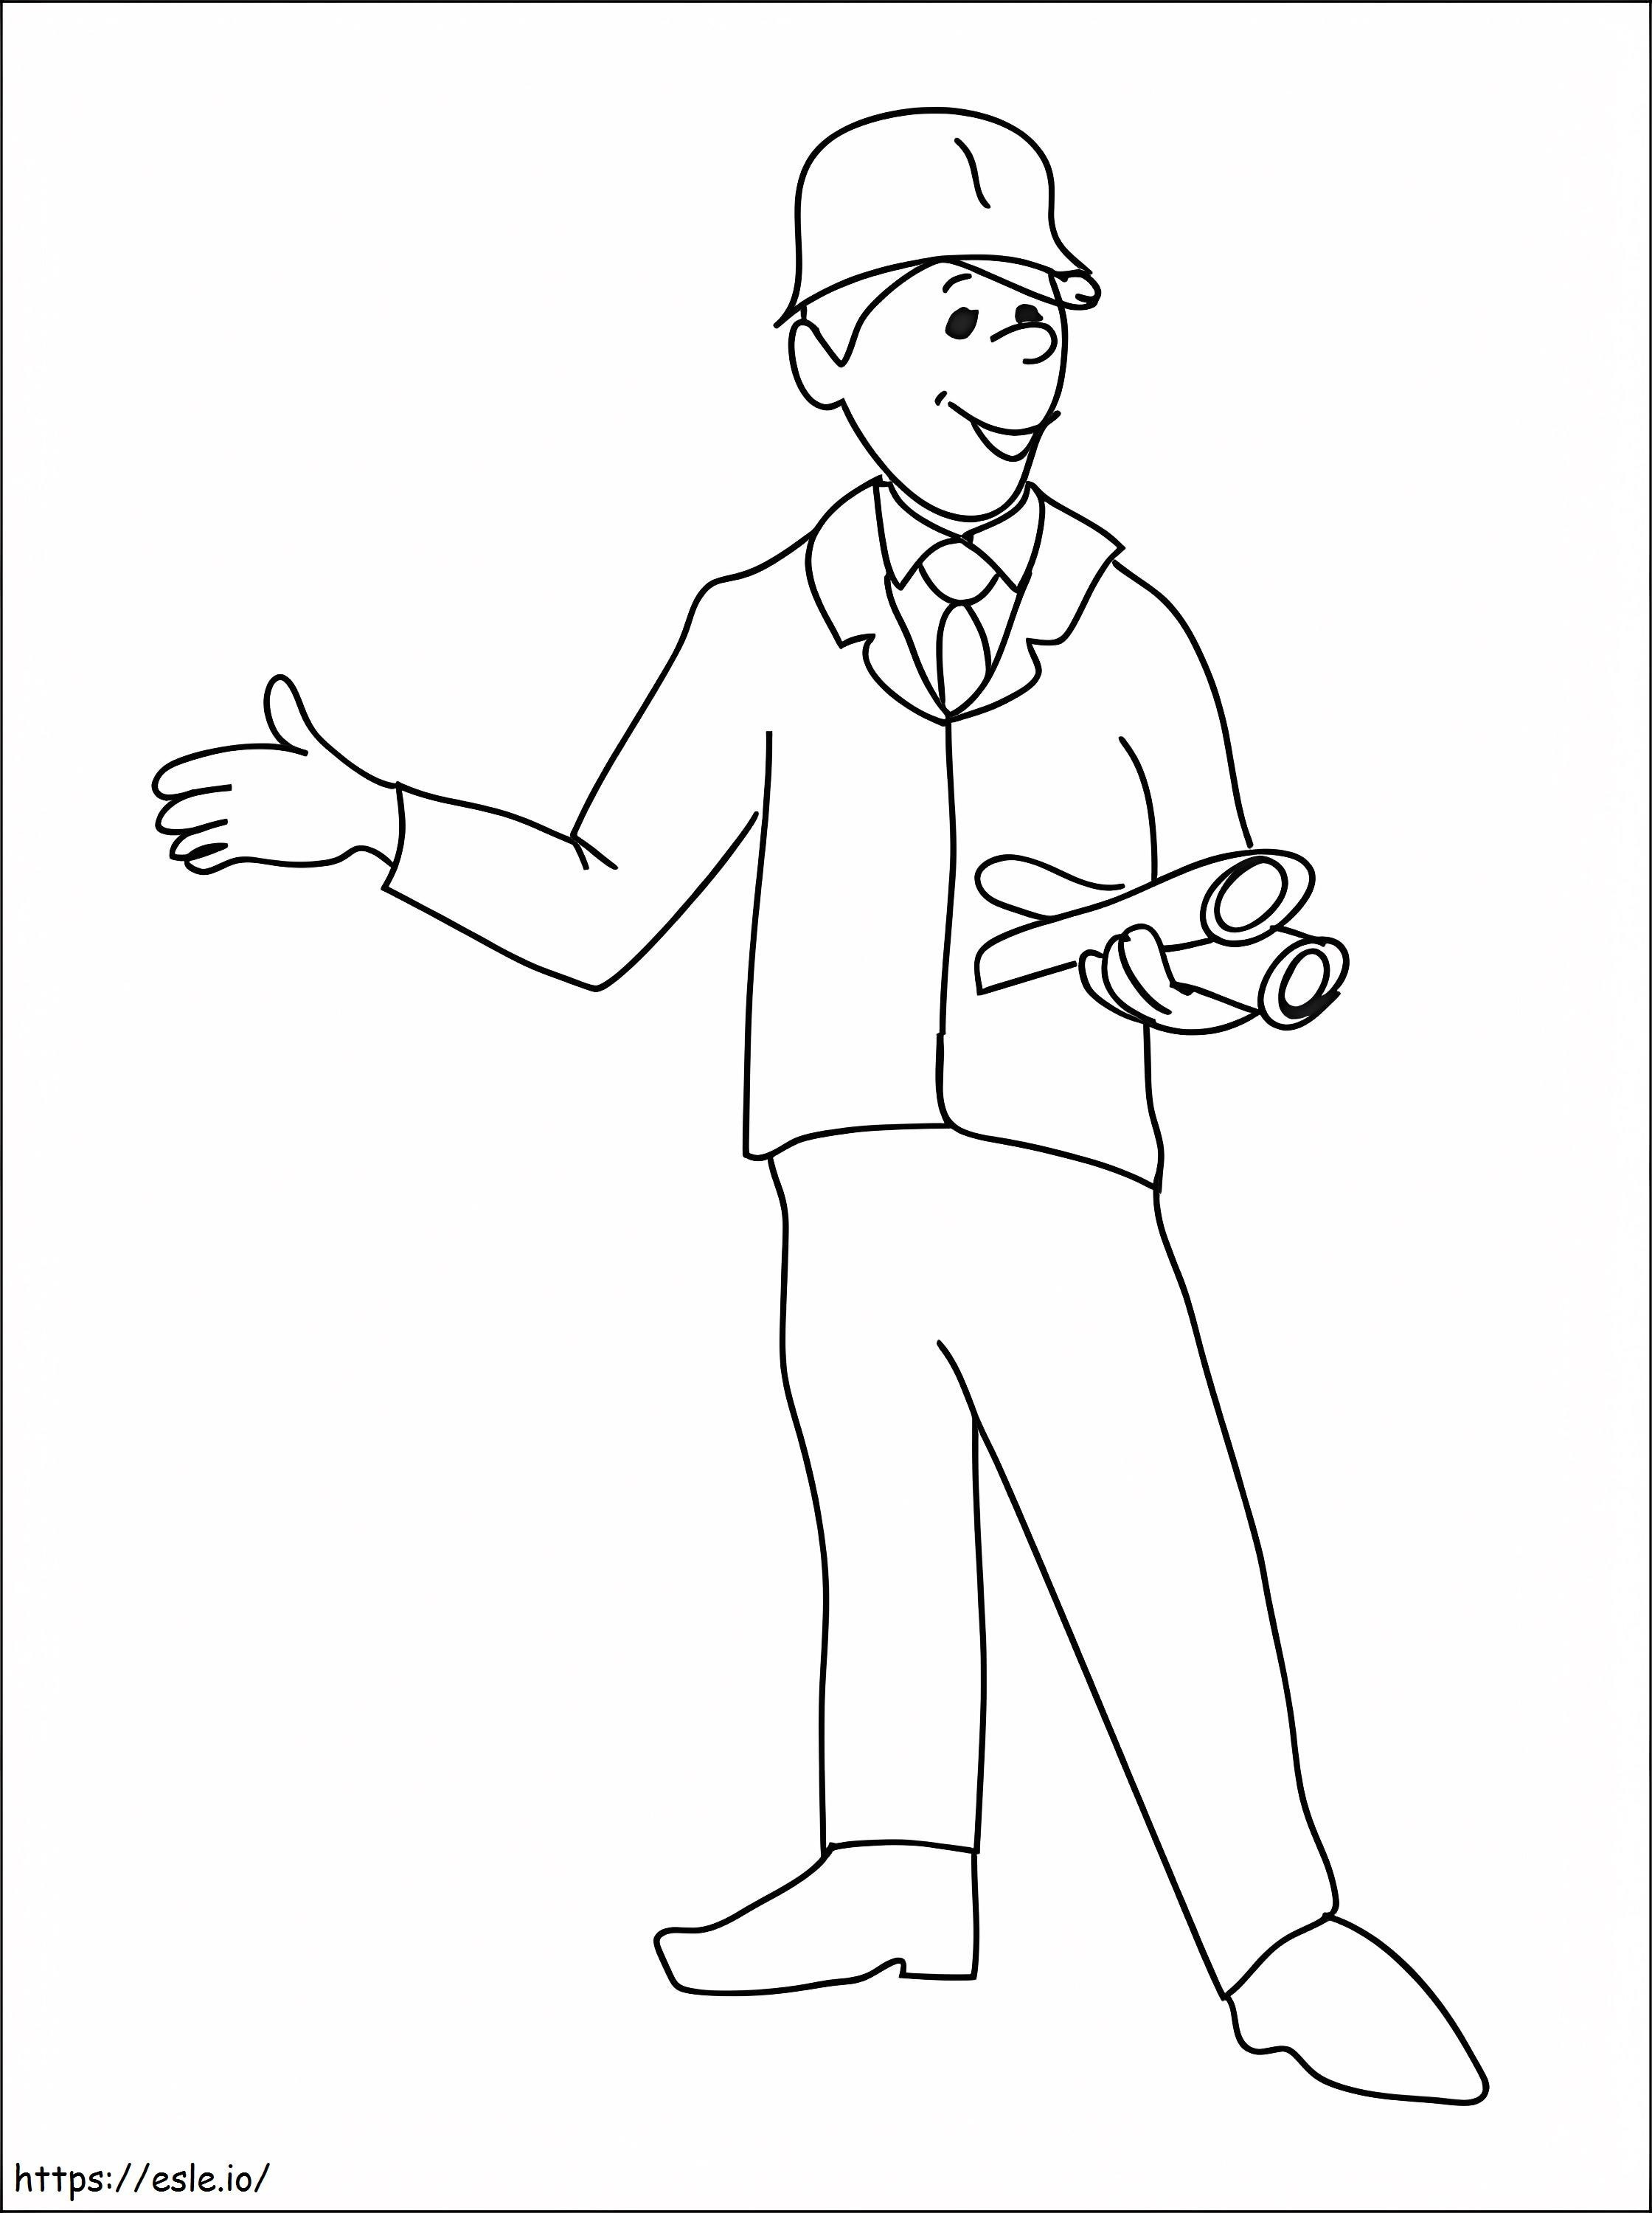 Engineer 2 coloring page